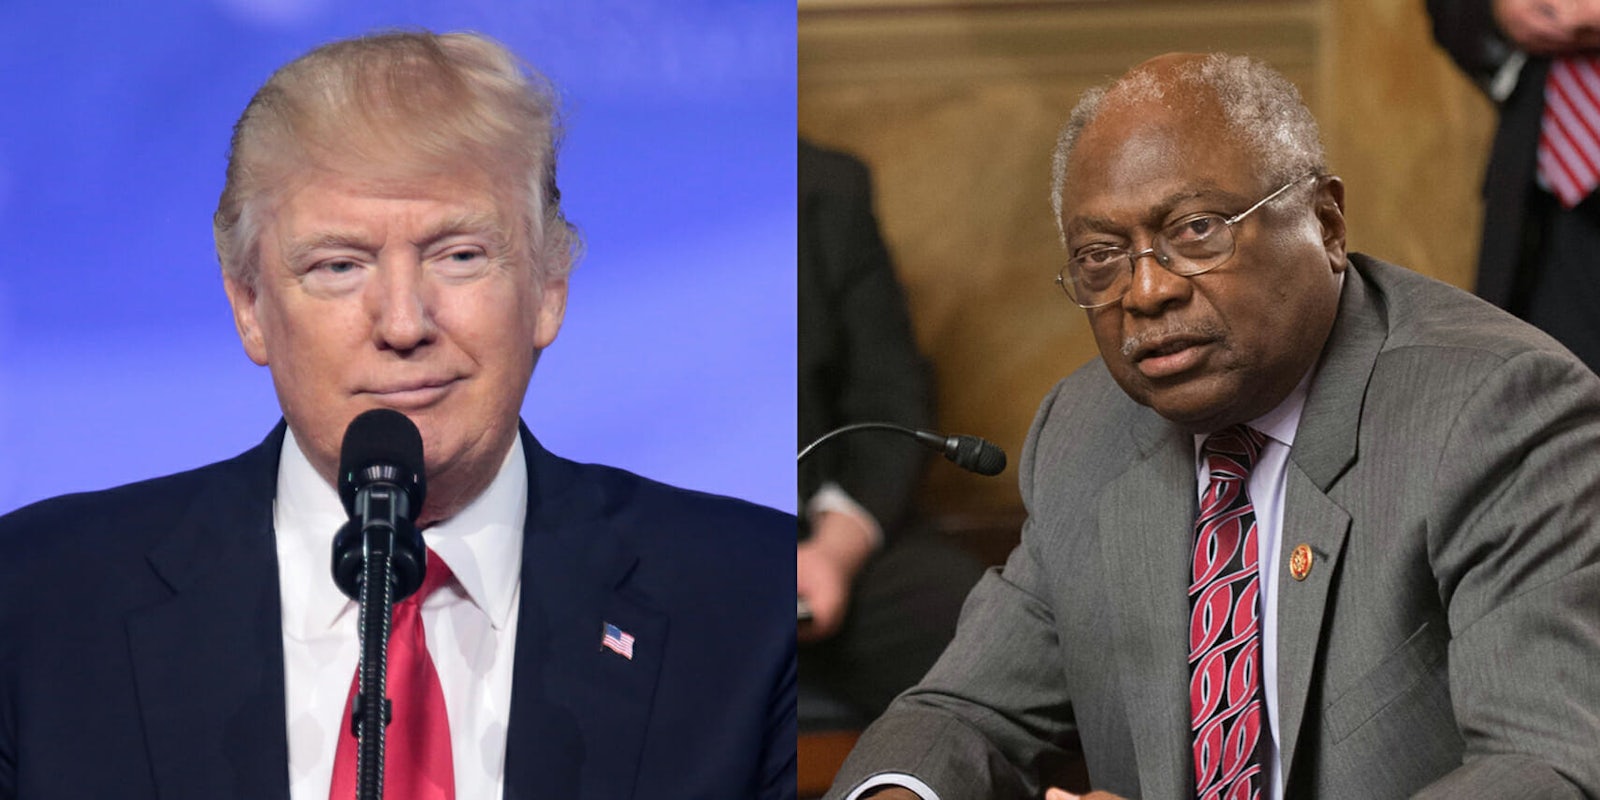 Rep. Jim Clyburn (D-S.C.) told BuzzFeed's AM to DM on Wednesday that he thinks the 'pee tape' of President Donald Trump is real.